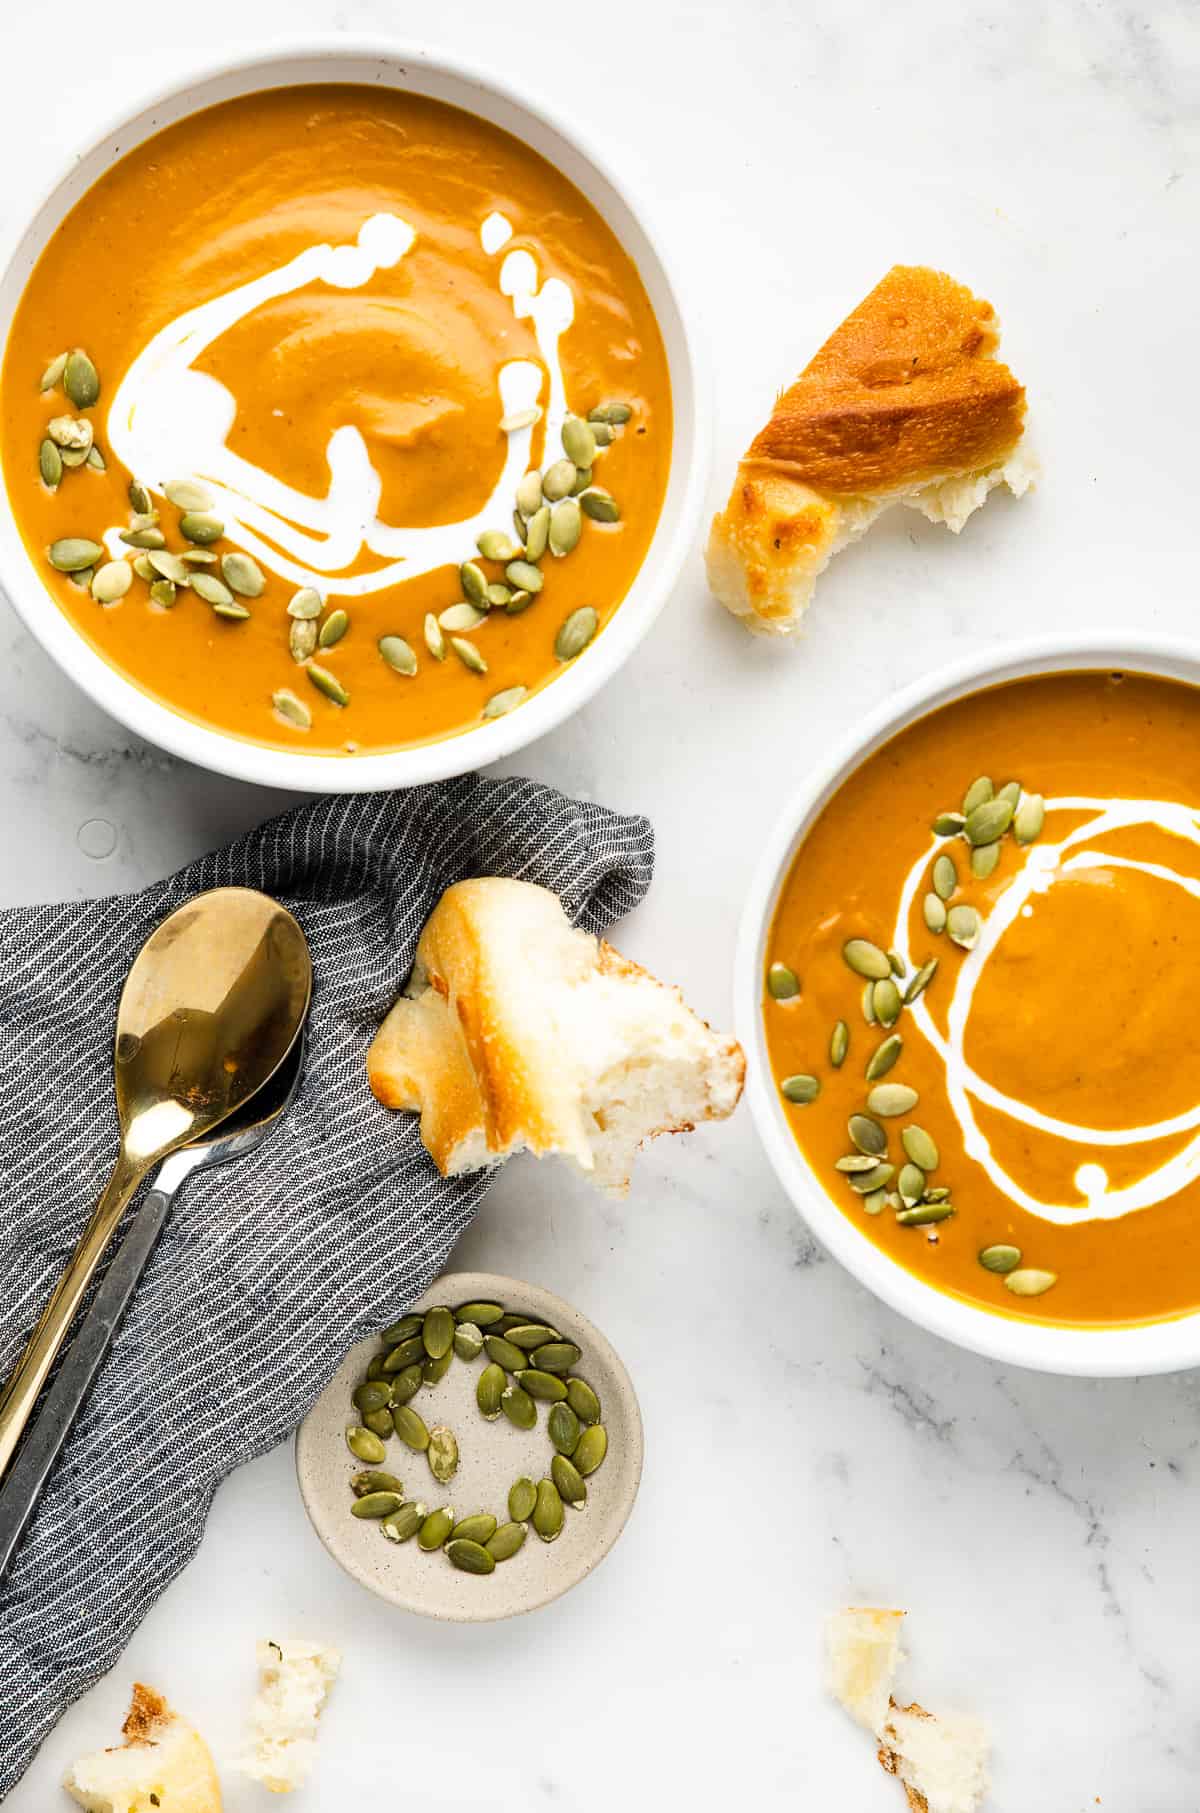 Two bowls of pumpkin soup, garnished with pumpkin seeds and served with bread.